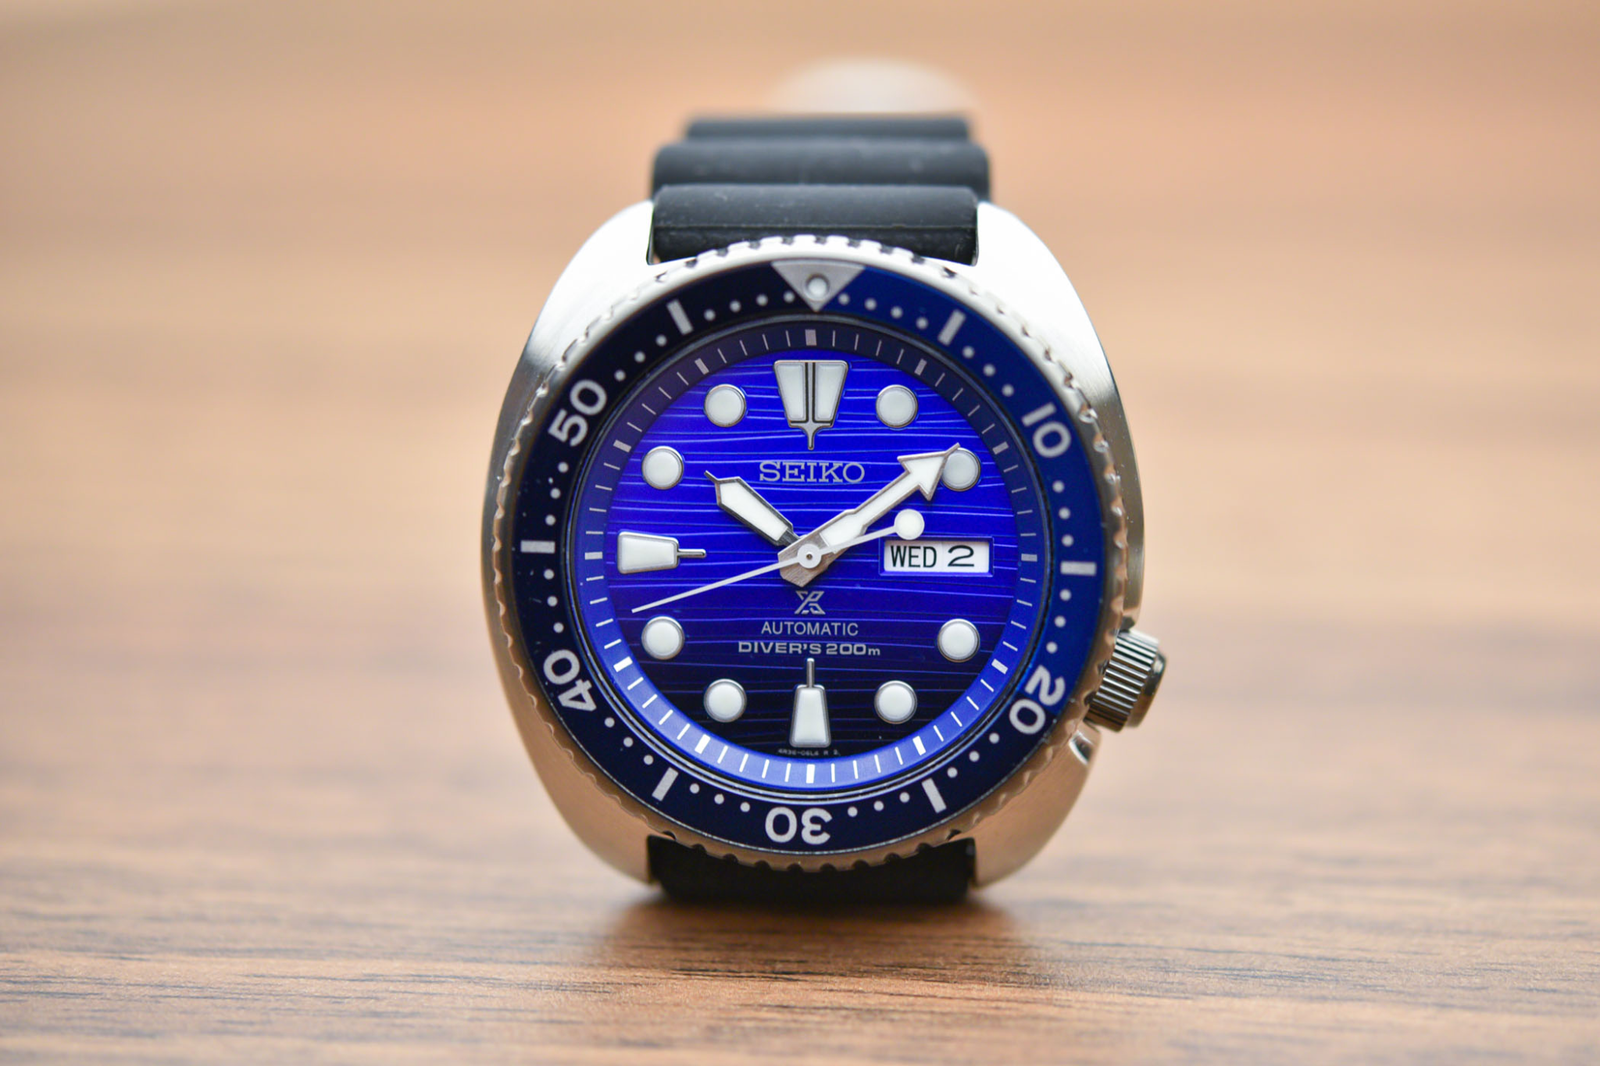 Seiko SRPC91K1 Save the Ocean Turtle Watch on Table